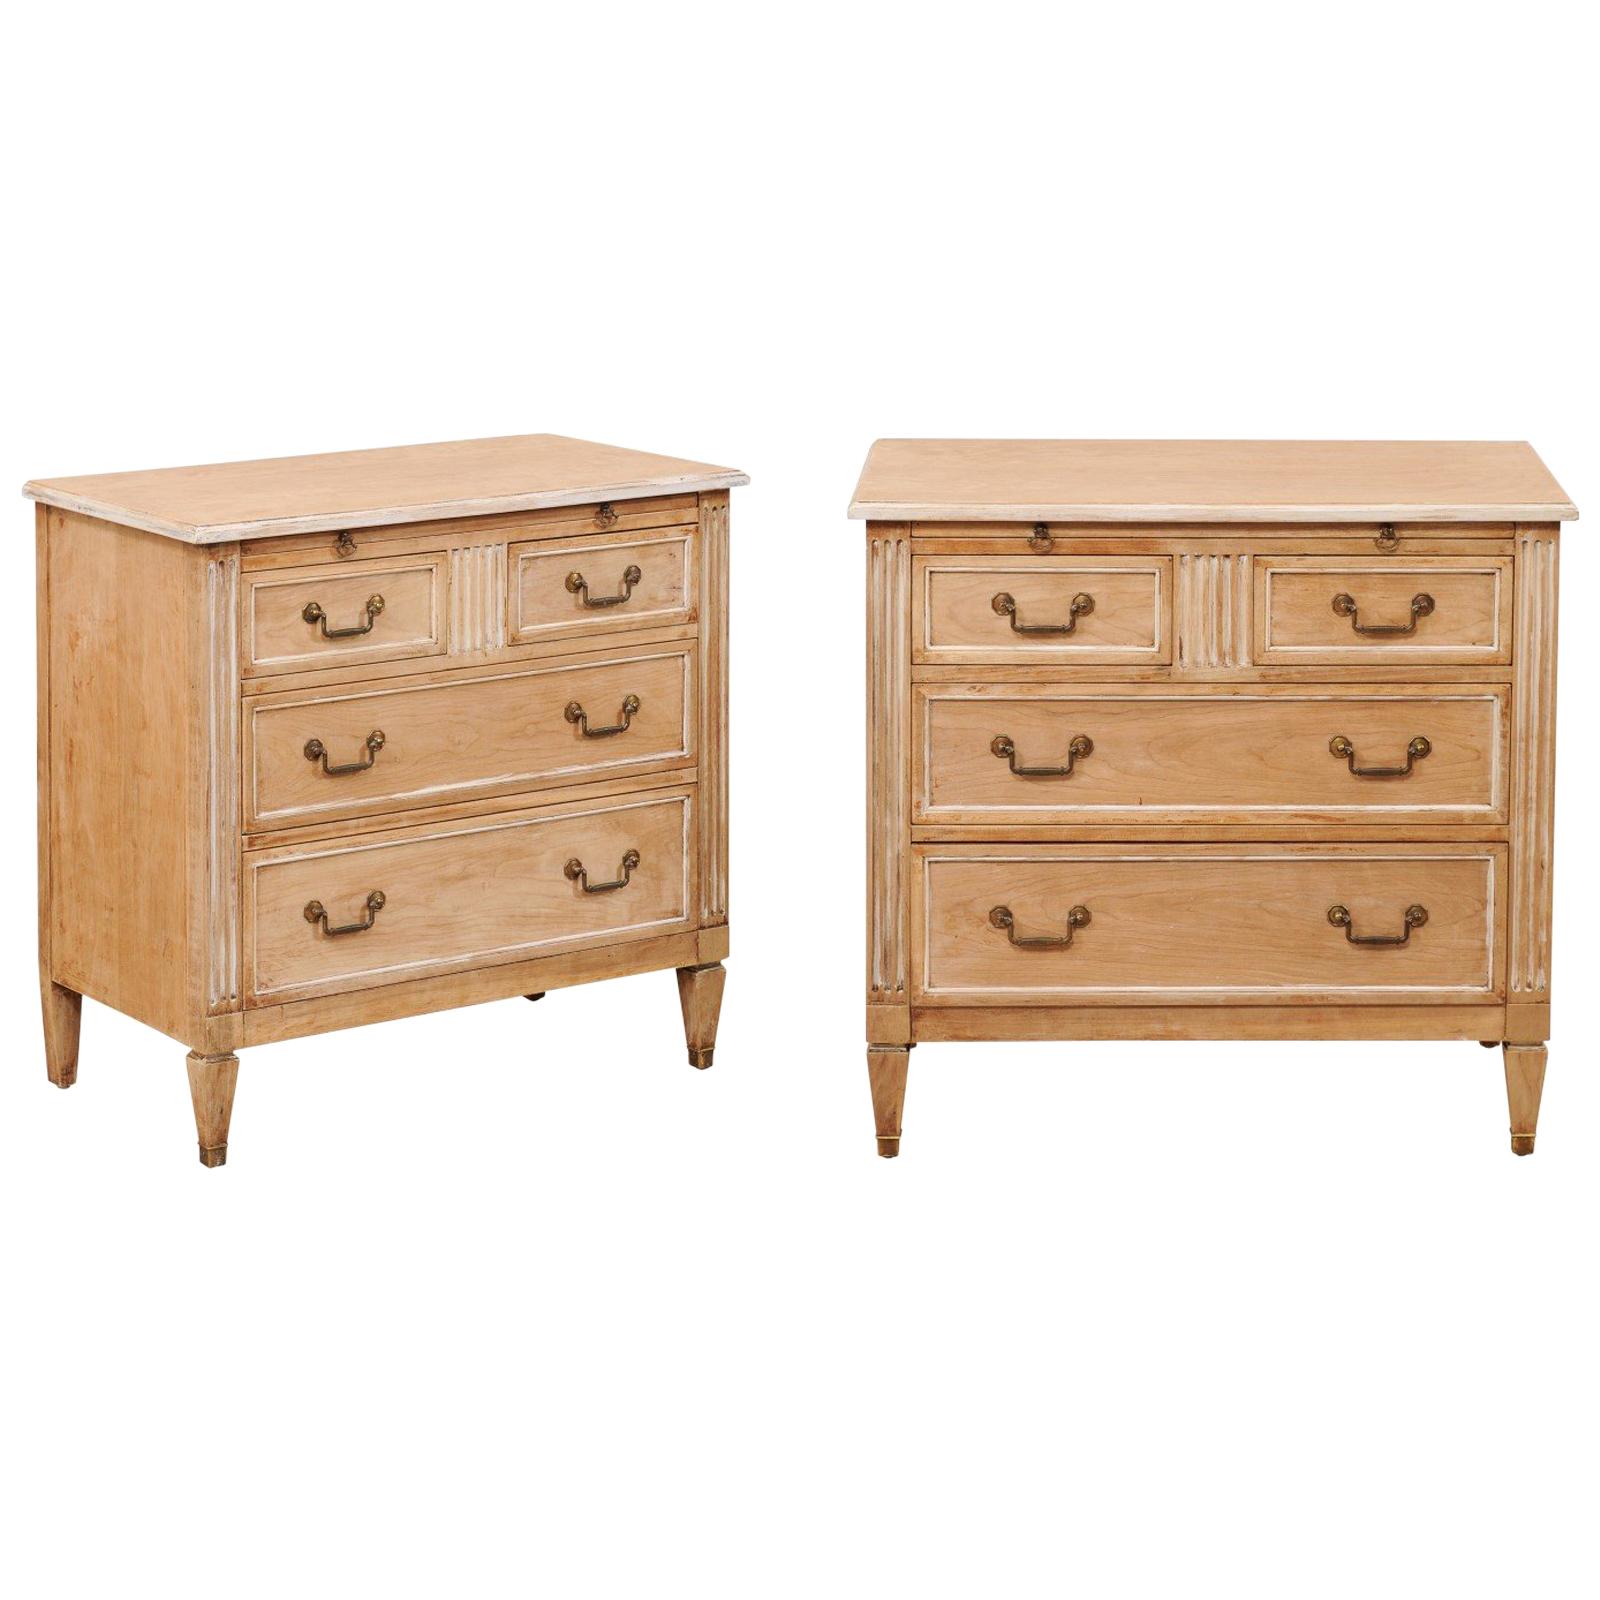 Pair of Kindel Bleached Wood Chests with Fluted Details